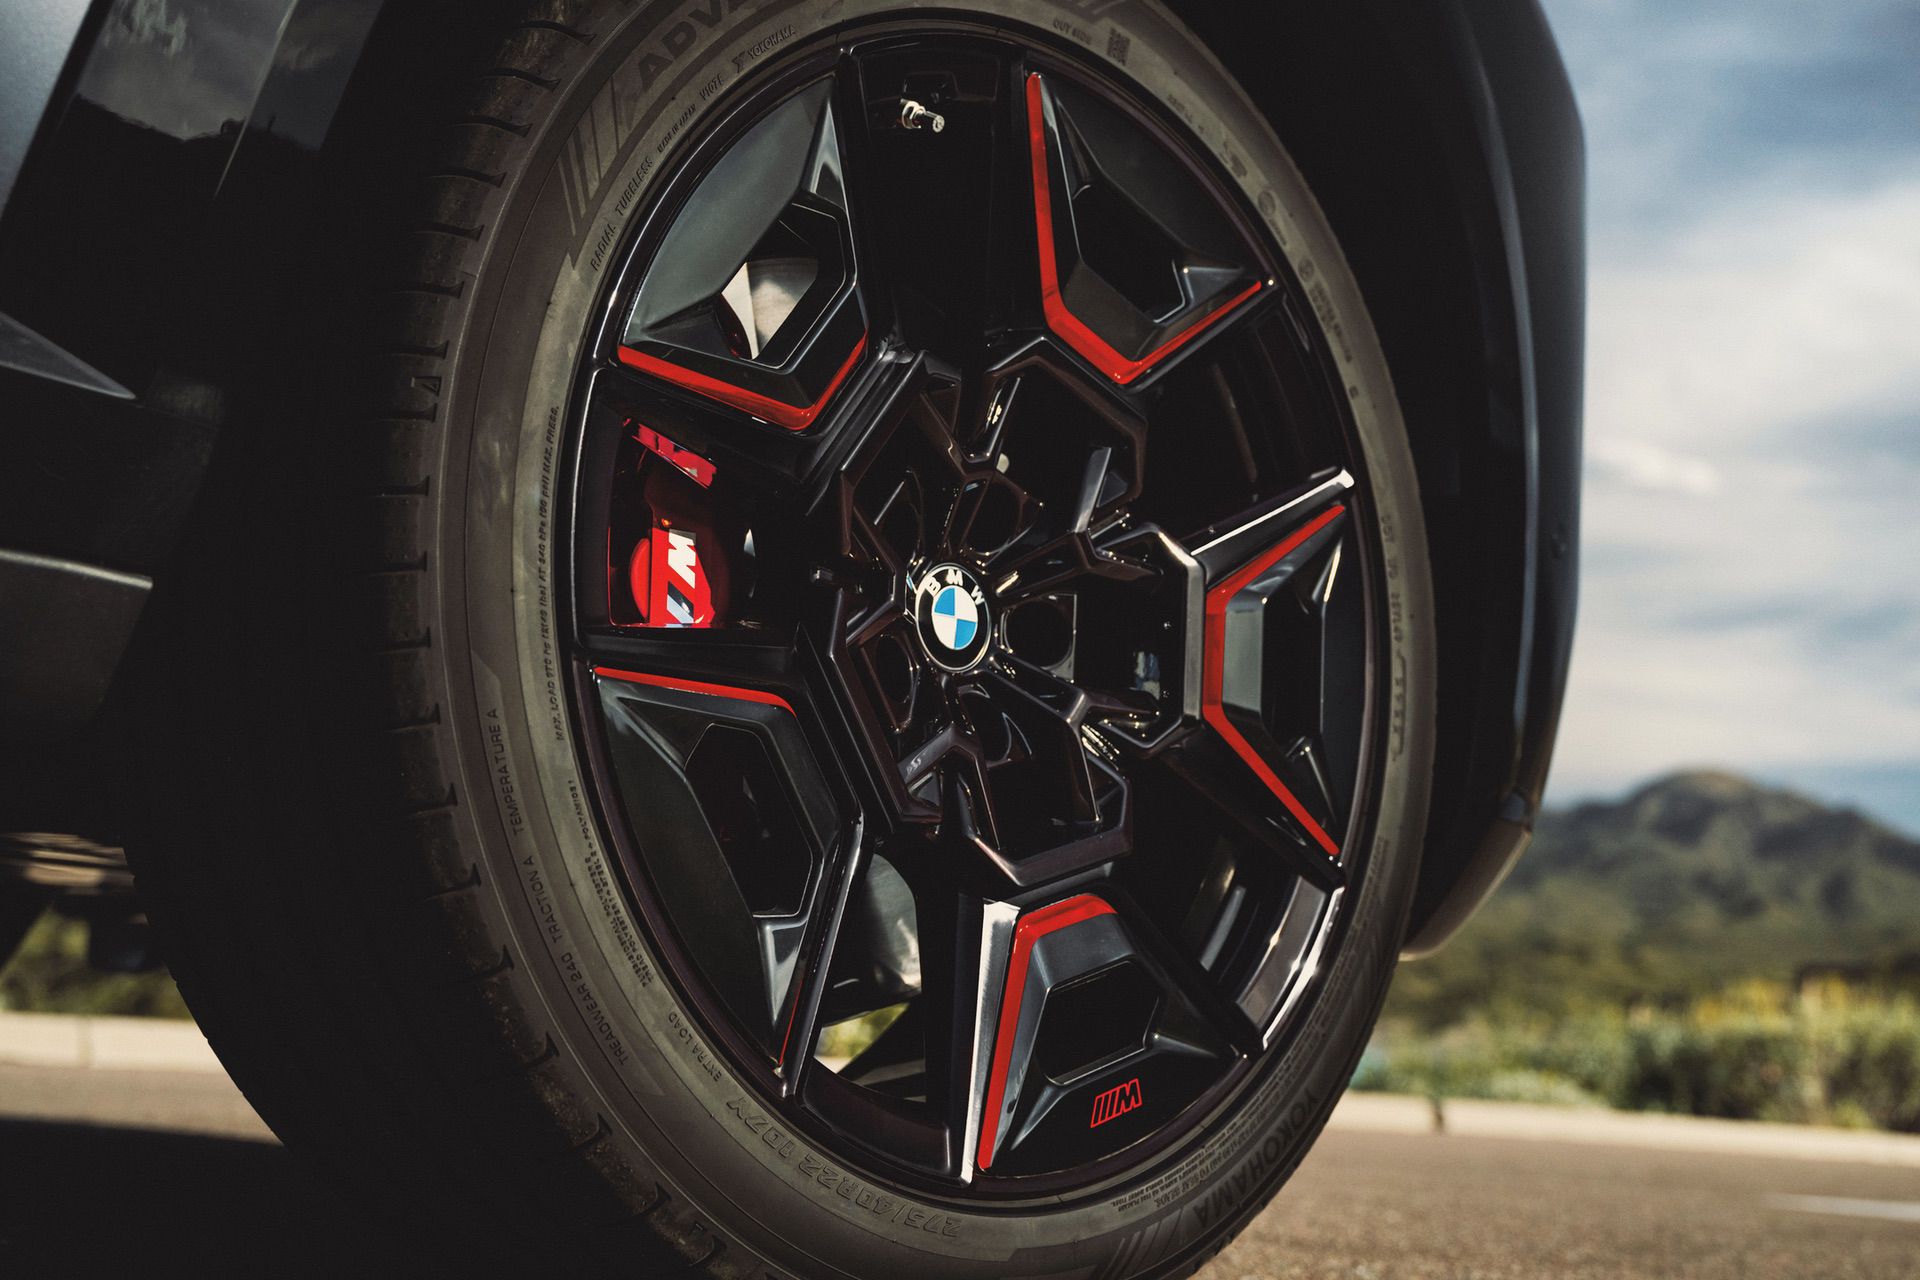 BMW Has Initiated a Worldwide Recall for the Integrated Braking System in a Total of 371,756 Vehicles